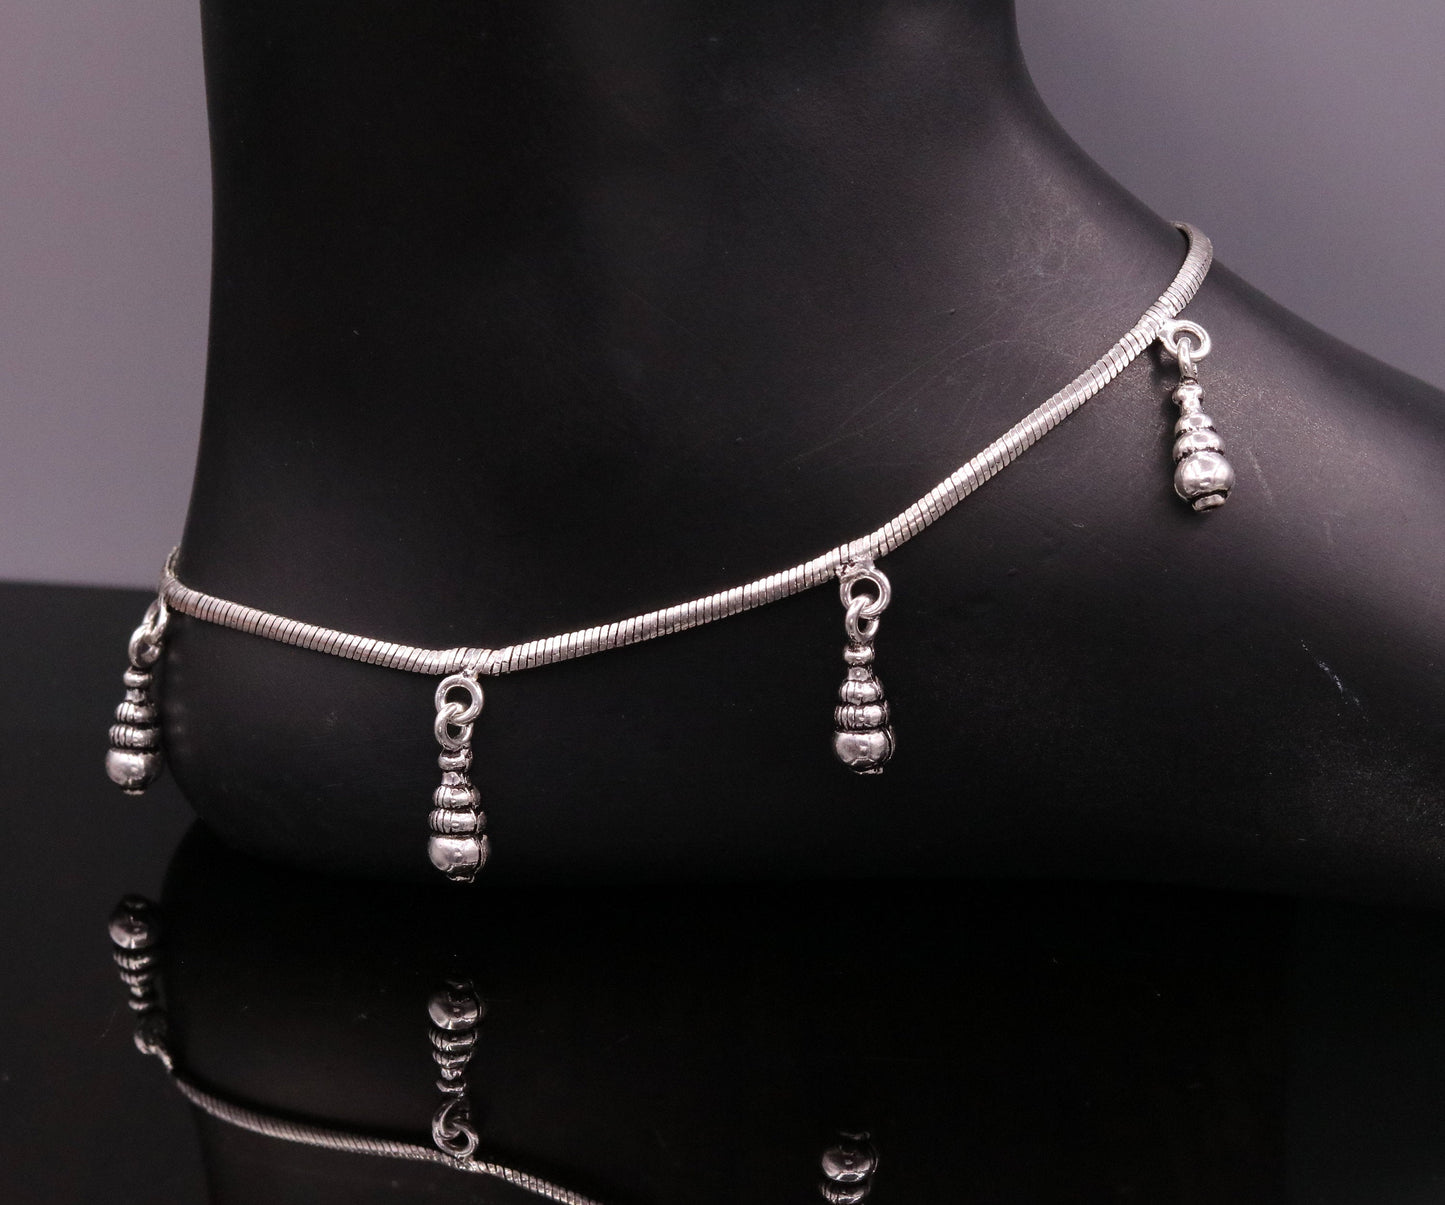 925 sterling silver handmade snake chain anklets, ankle bracelet, foot jewelry, charm ankle bracelet, dainty gifting belly dance ank76 - TRIBAL ORNAMENTS